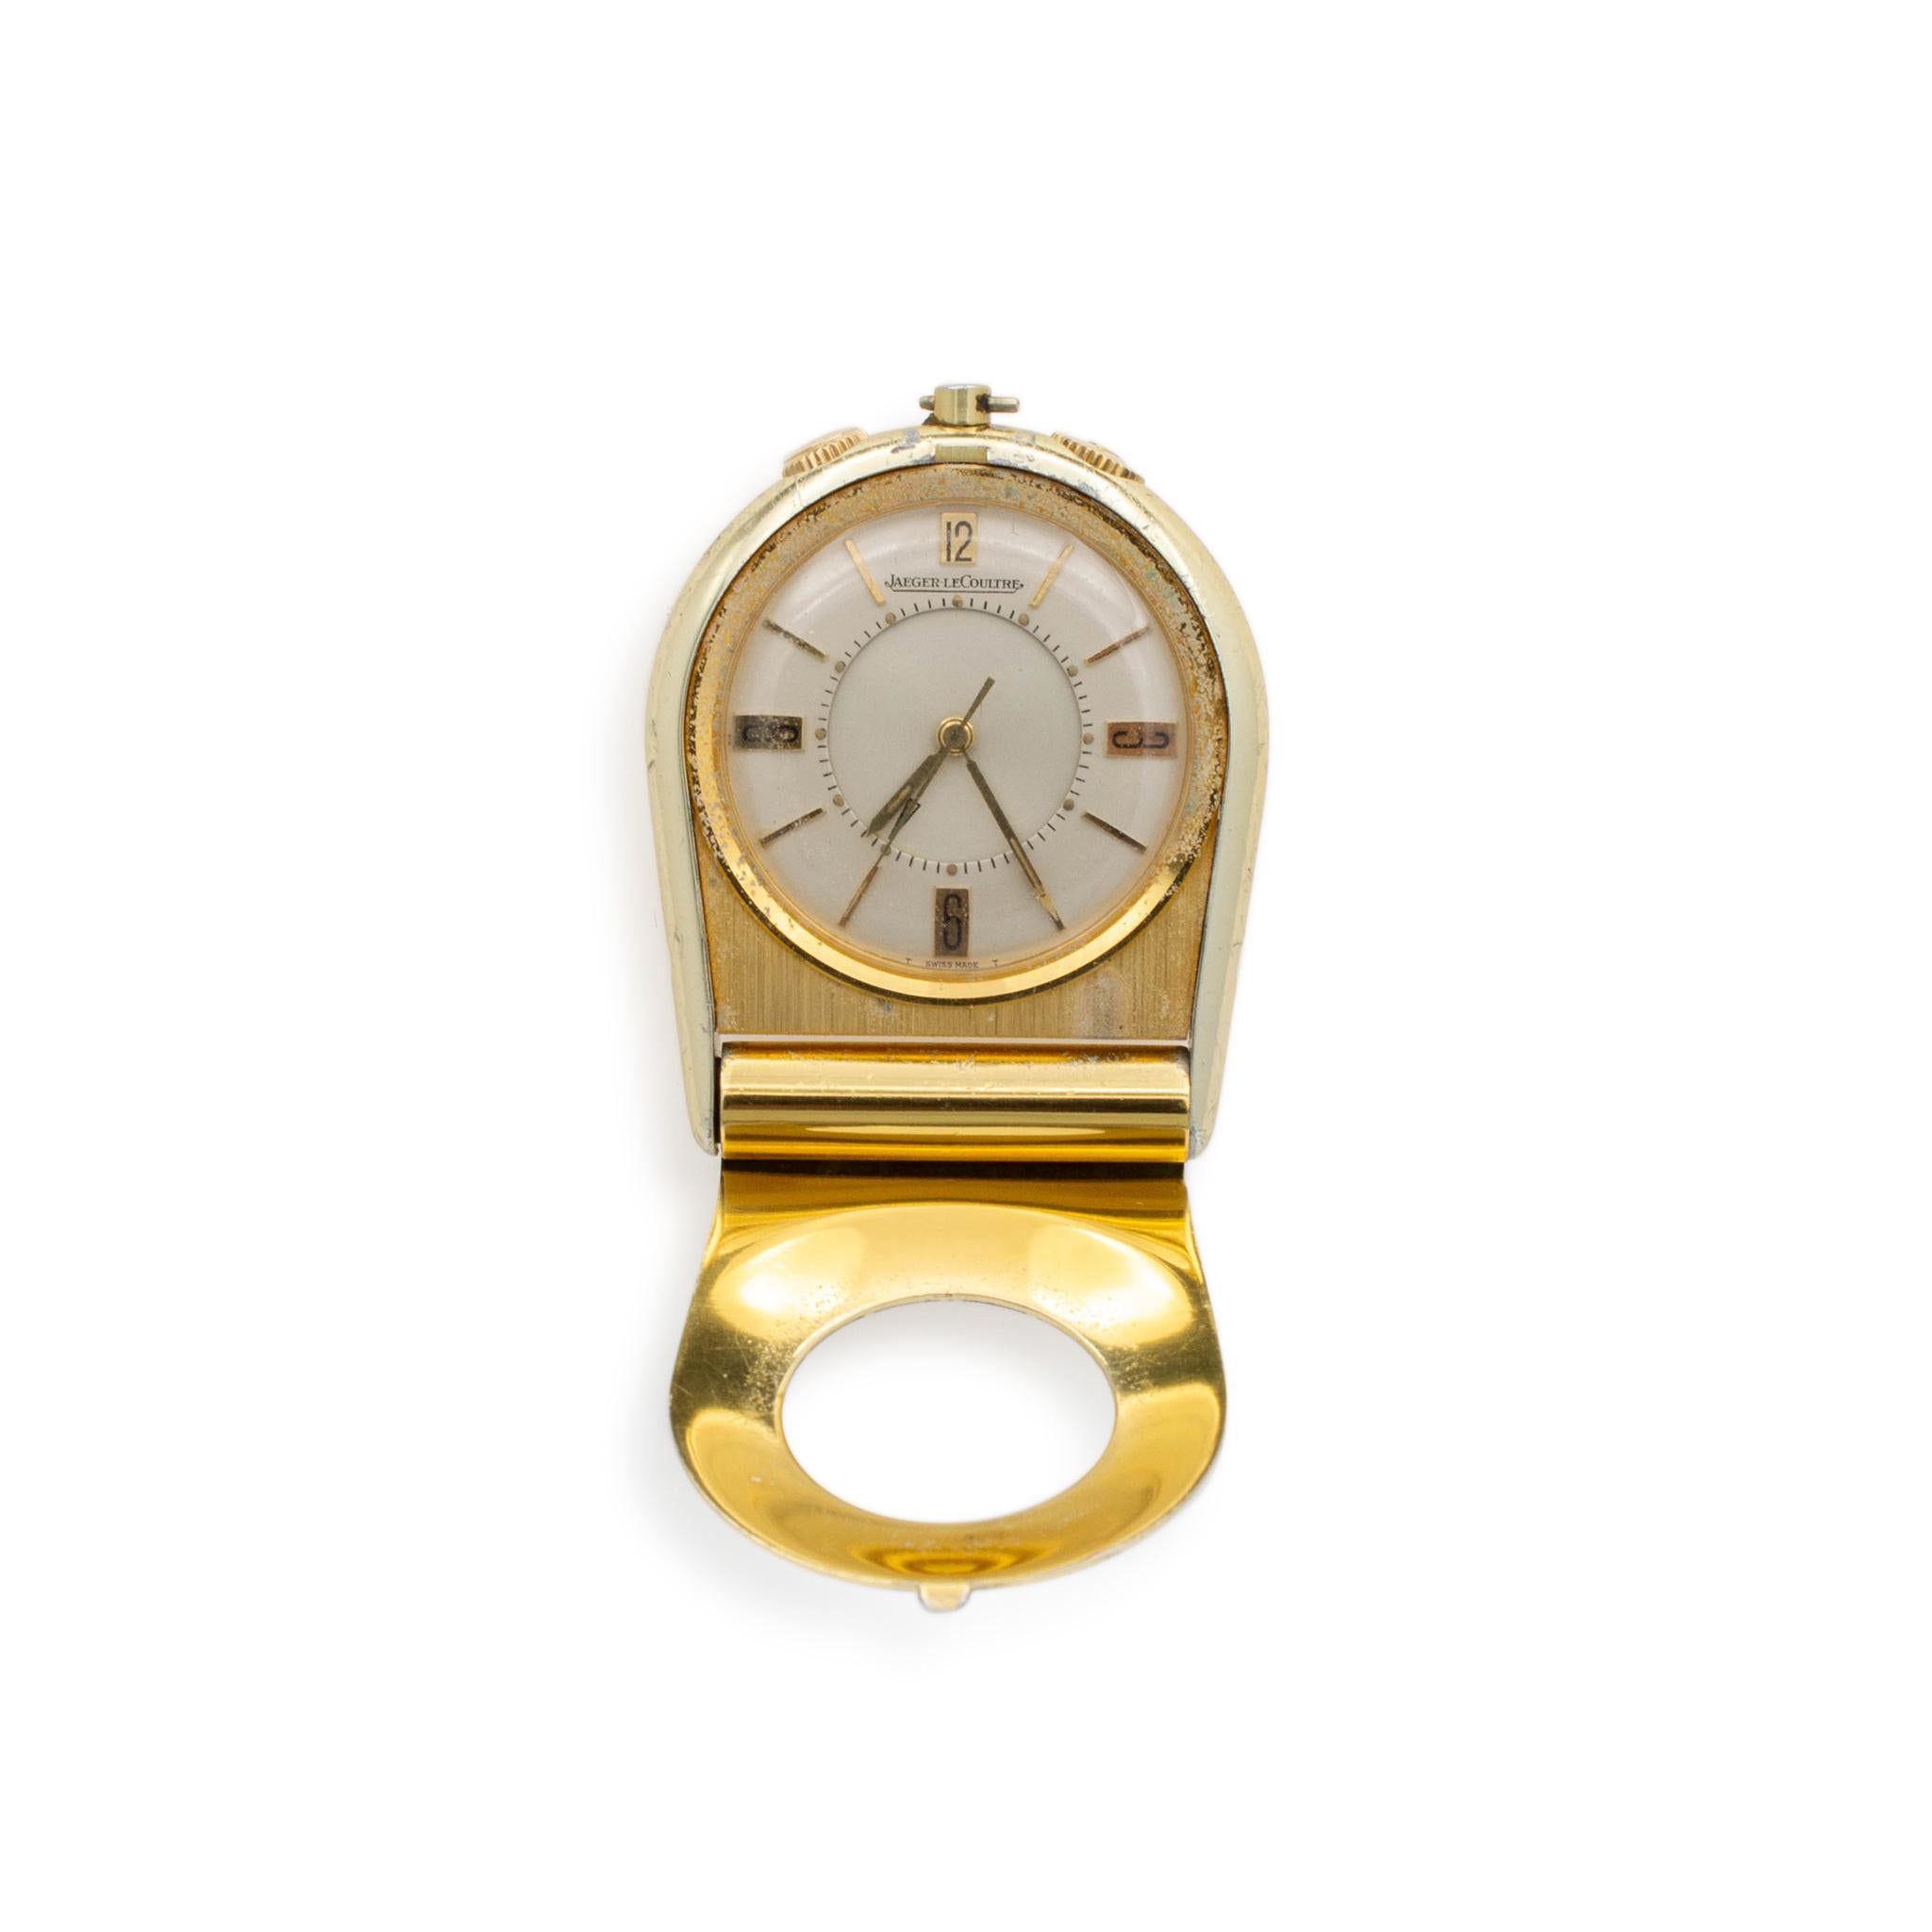 Brand: Jaeger Lecoultre

Metal Type: 18K yellow gold

Thickness: 9.80mm

Width: 41.00 mm

Length: 1.75 inches

Weight: 42.54 grams

Jaeger Lecoultre 18K yellow gold Swiss made pocket watch. Pre-owned in fair condition. Might show minor signs of